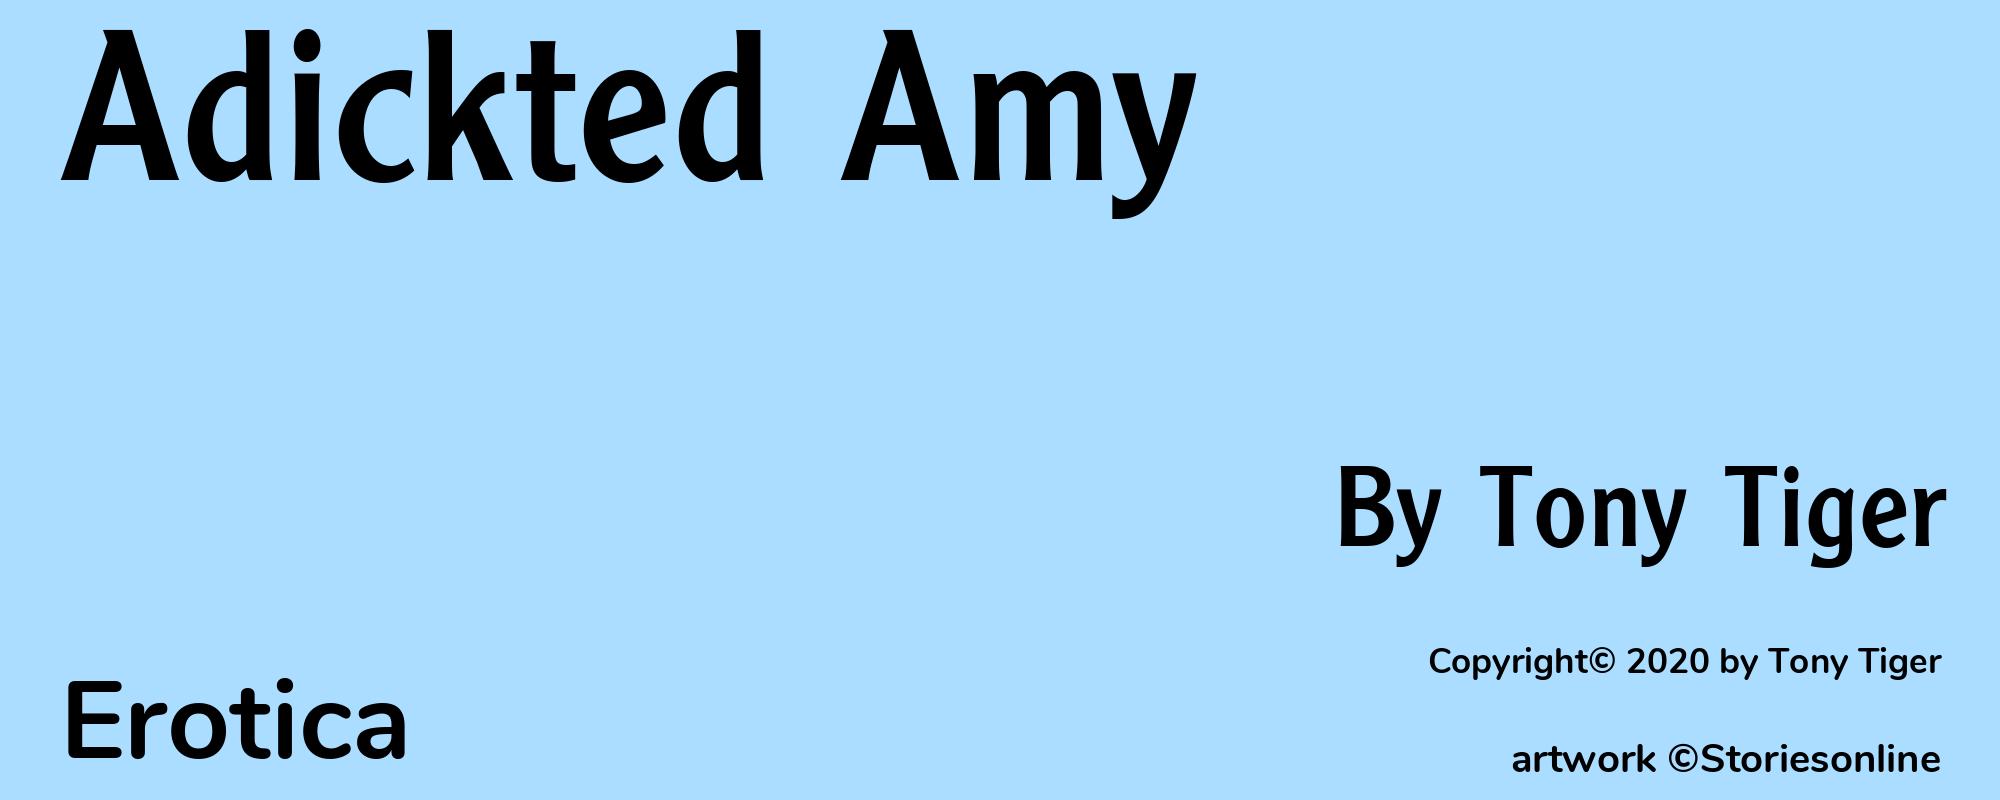 Adickted Amy - Cover